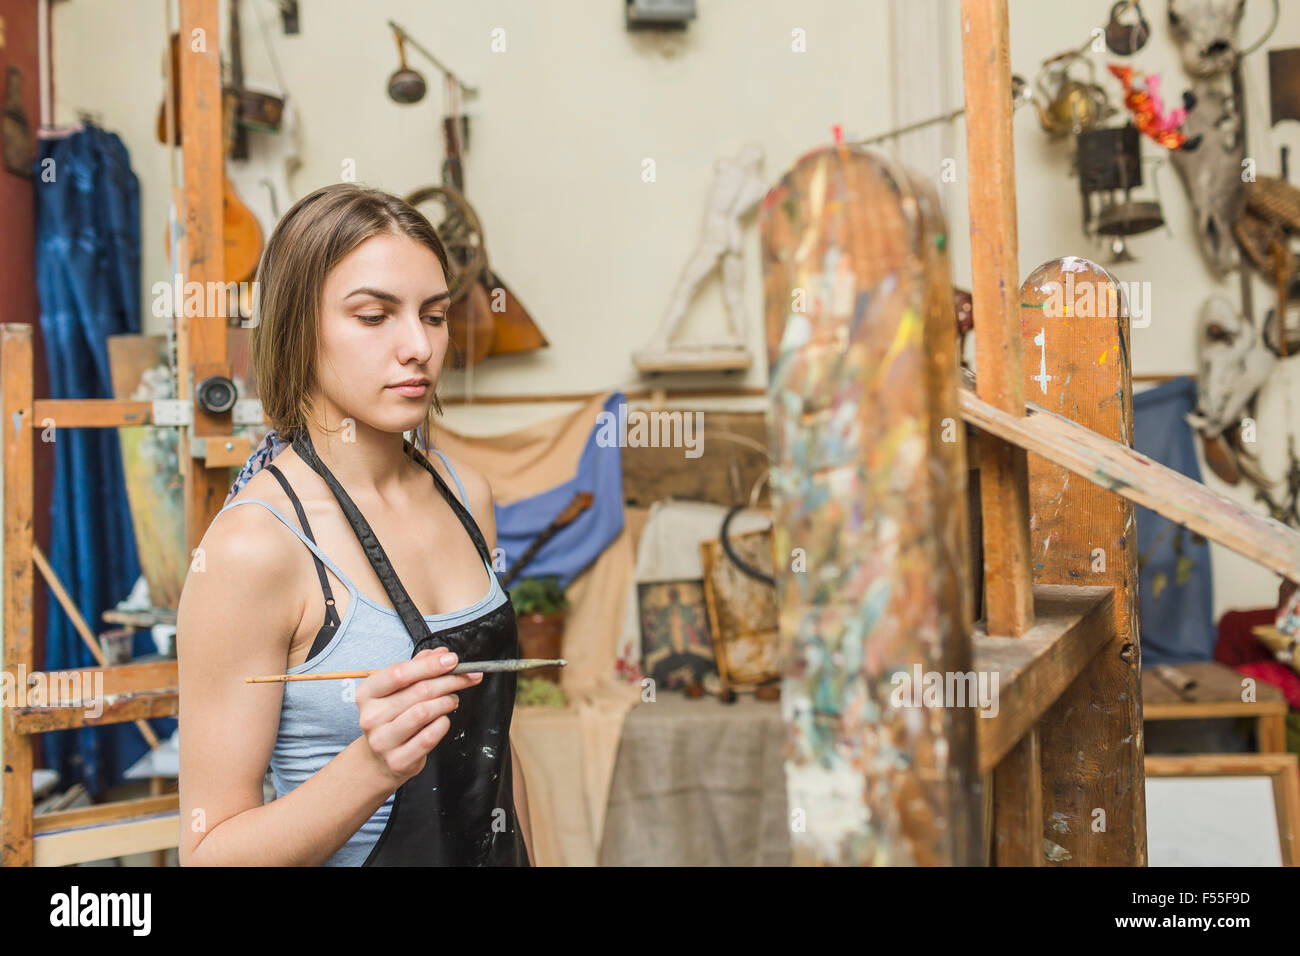 Female painter holding paintbrush and looking at easel at studio Stock Photo